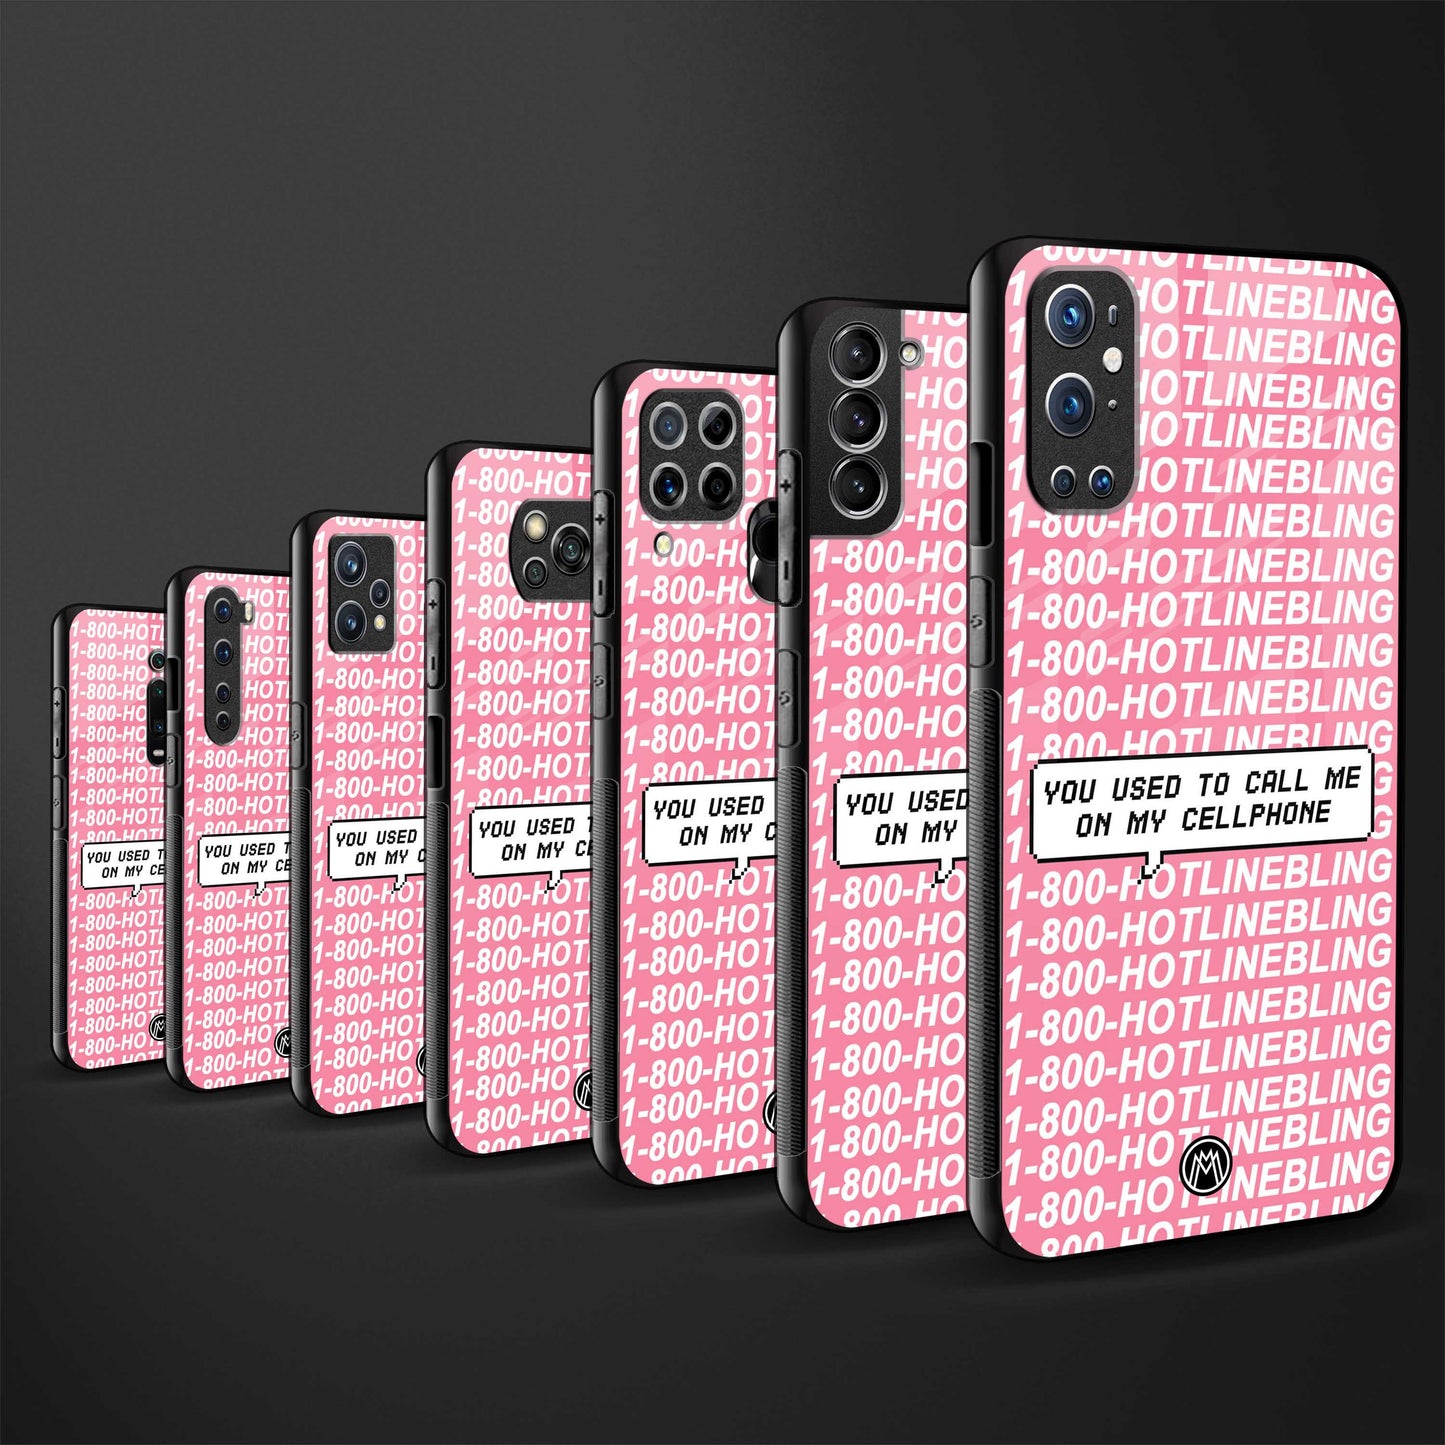 1800 hotline bling phone cover for samsung galaxy a50s 